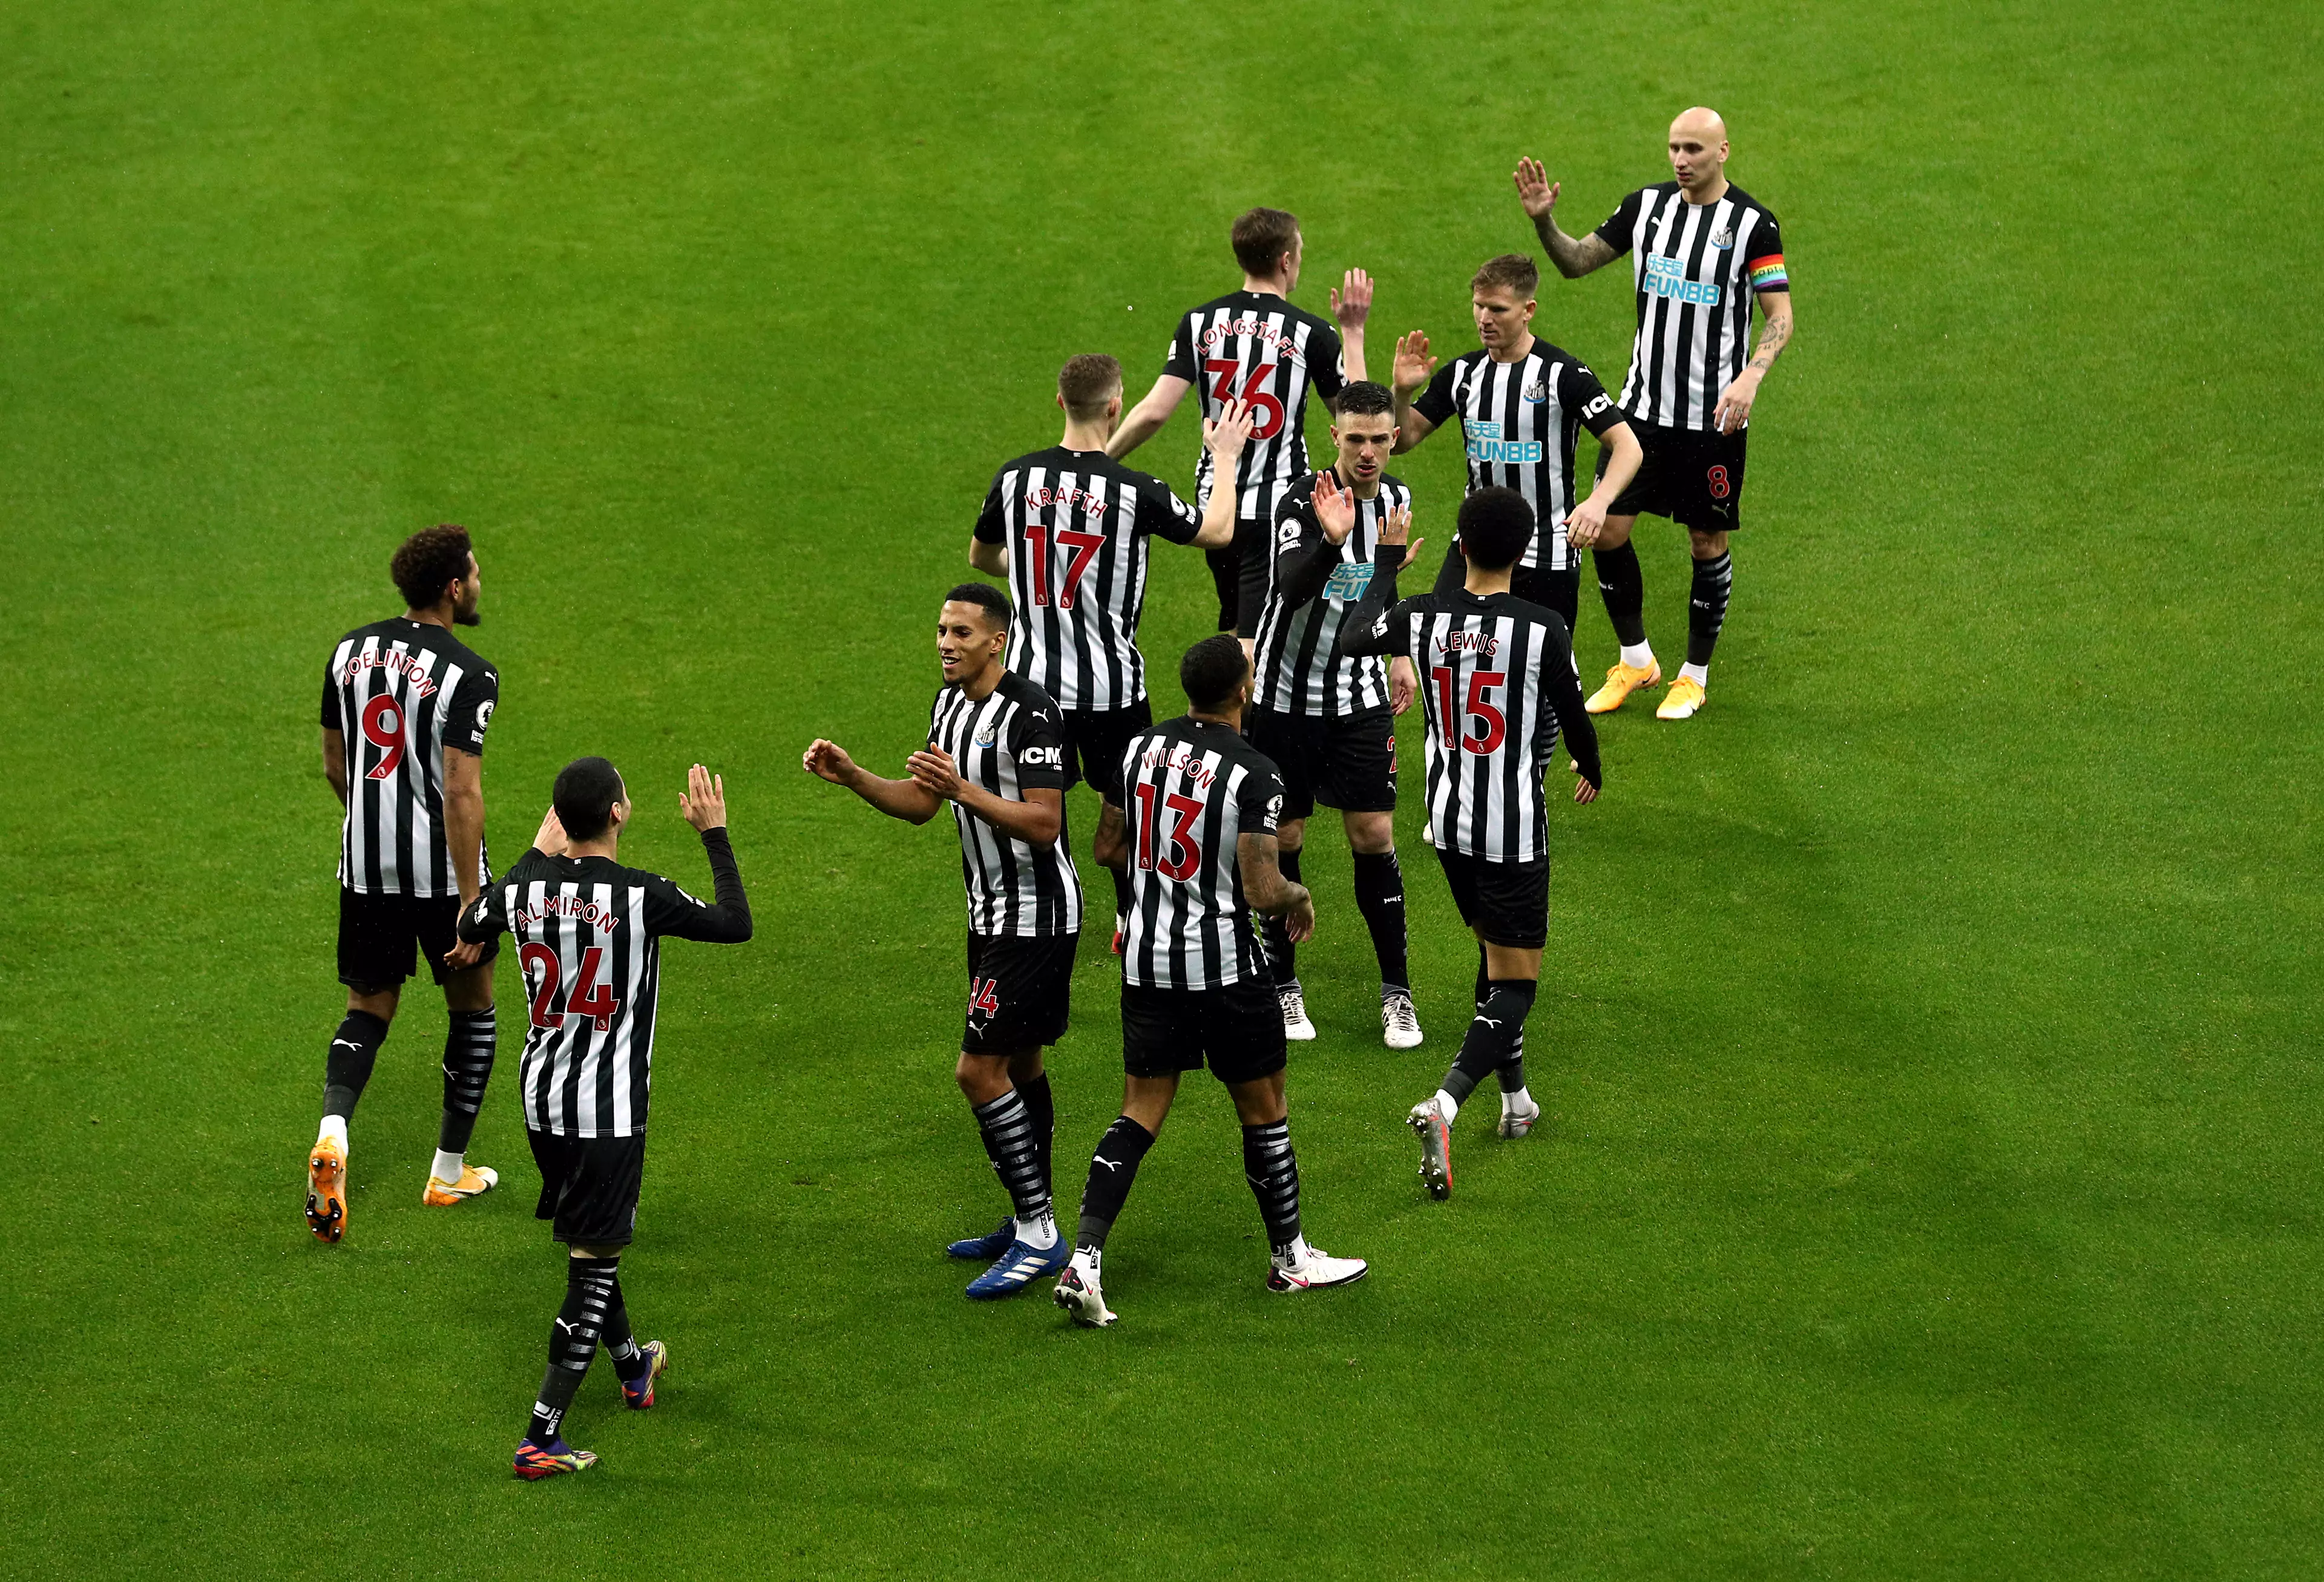 Newcastle's last win came a month ago against West Brom. Image: PA Images